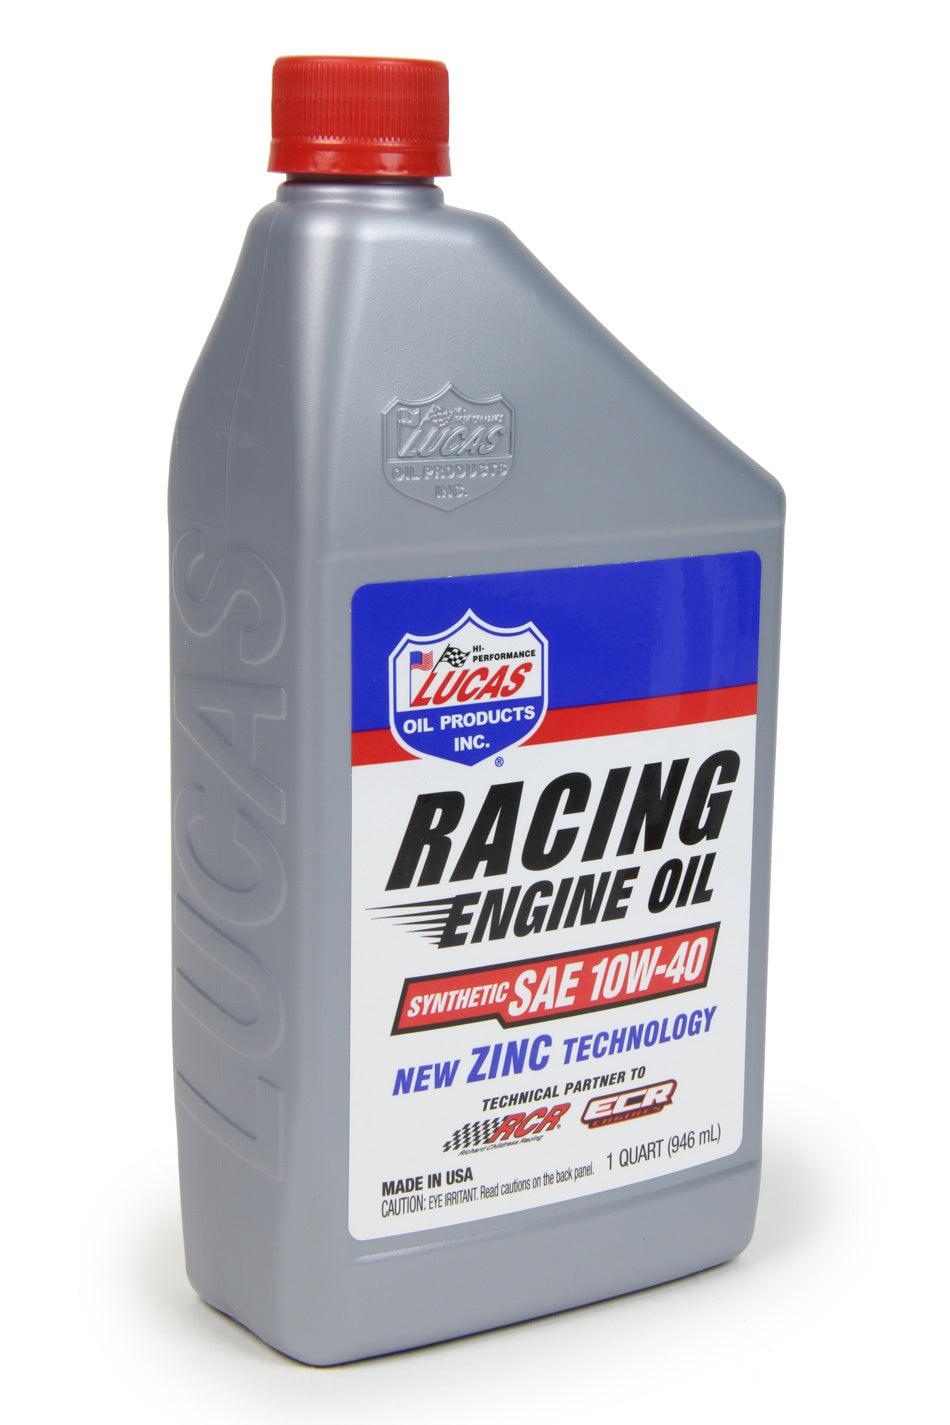 10w40 Synthetic Racing Oil 1 Quart - Burlile Performance Products